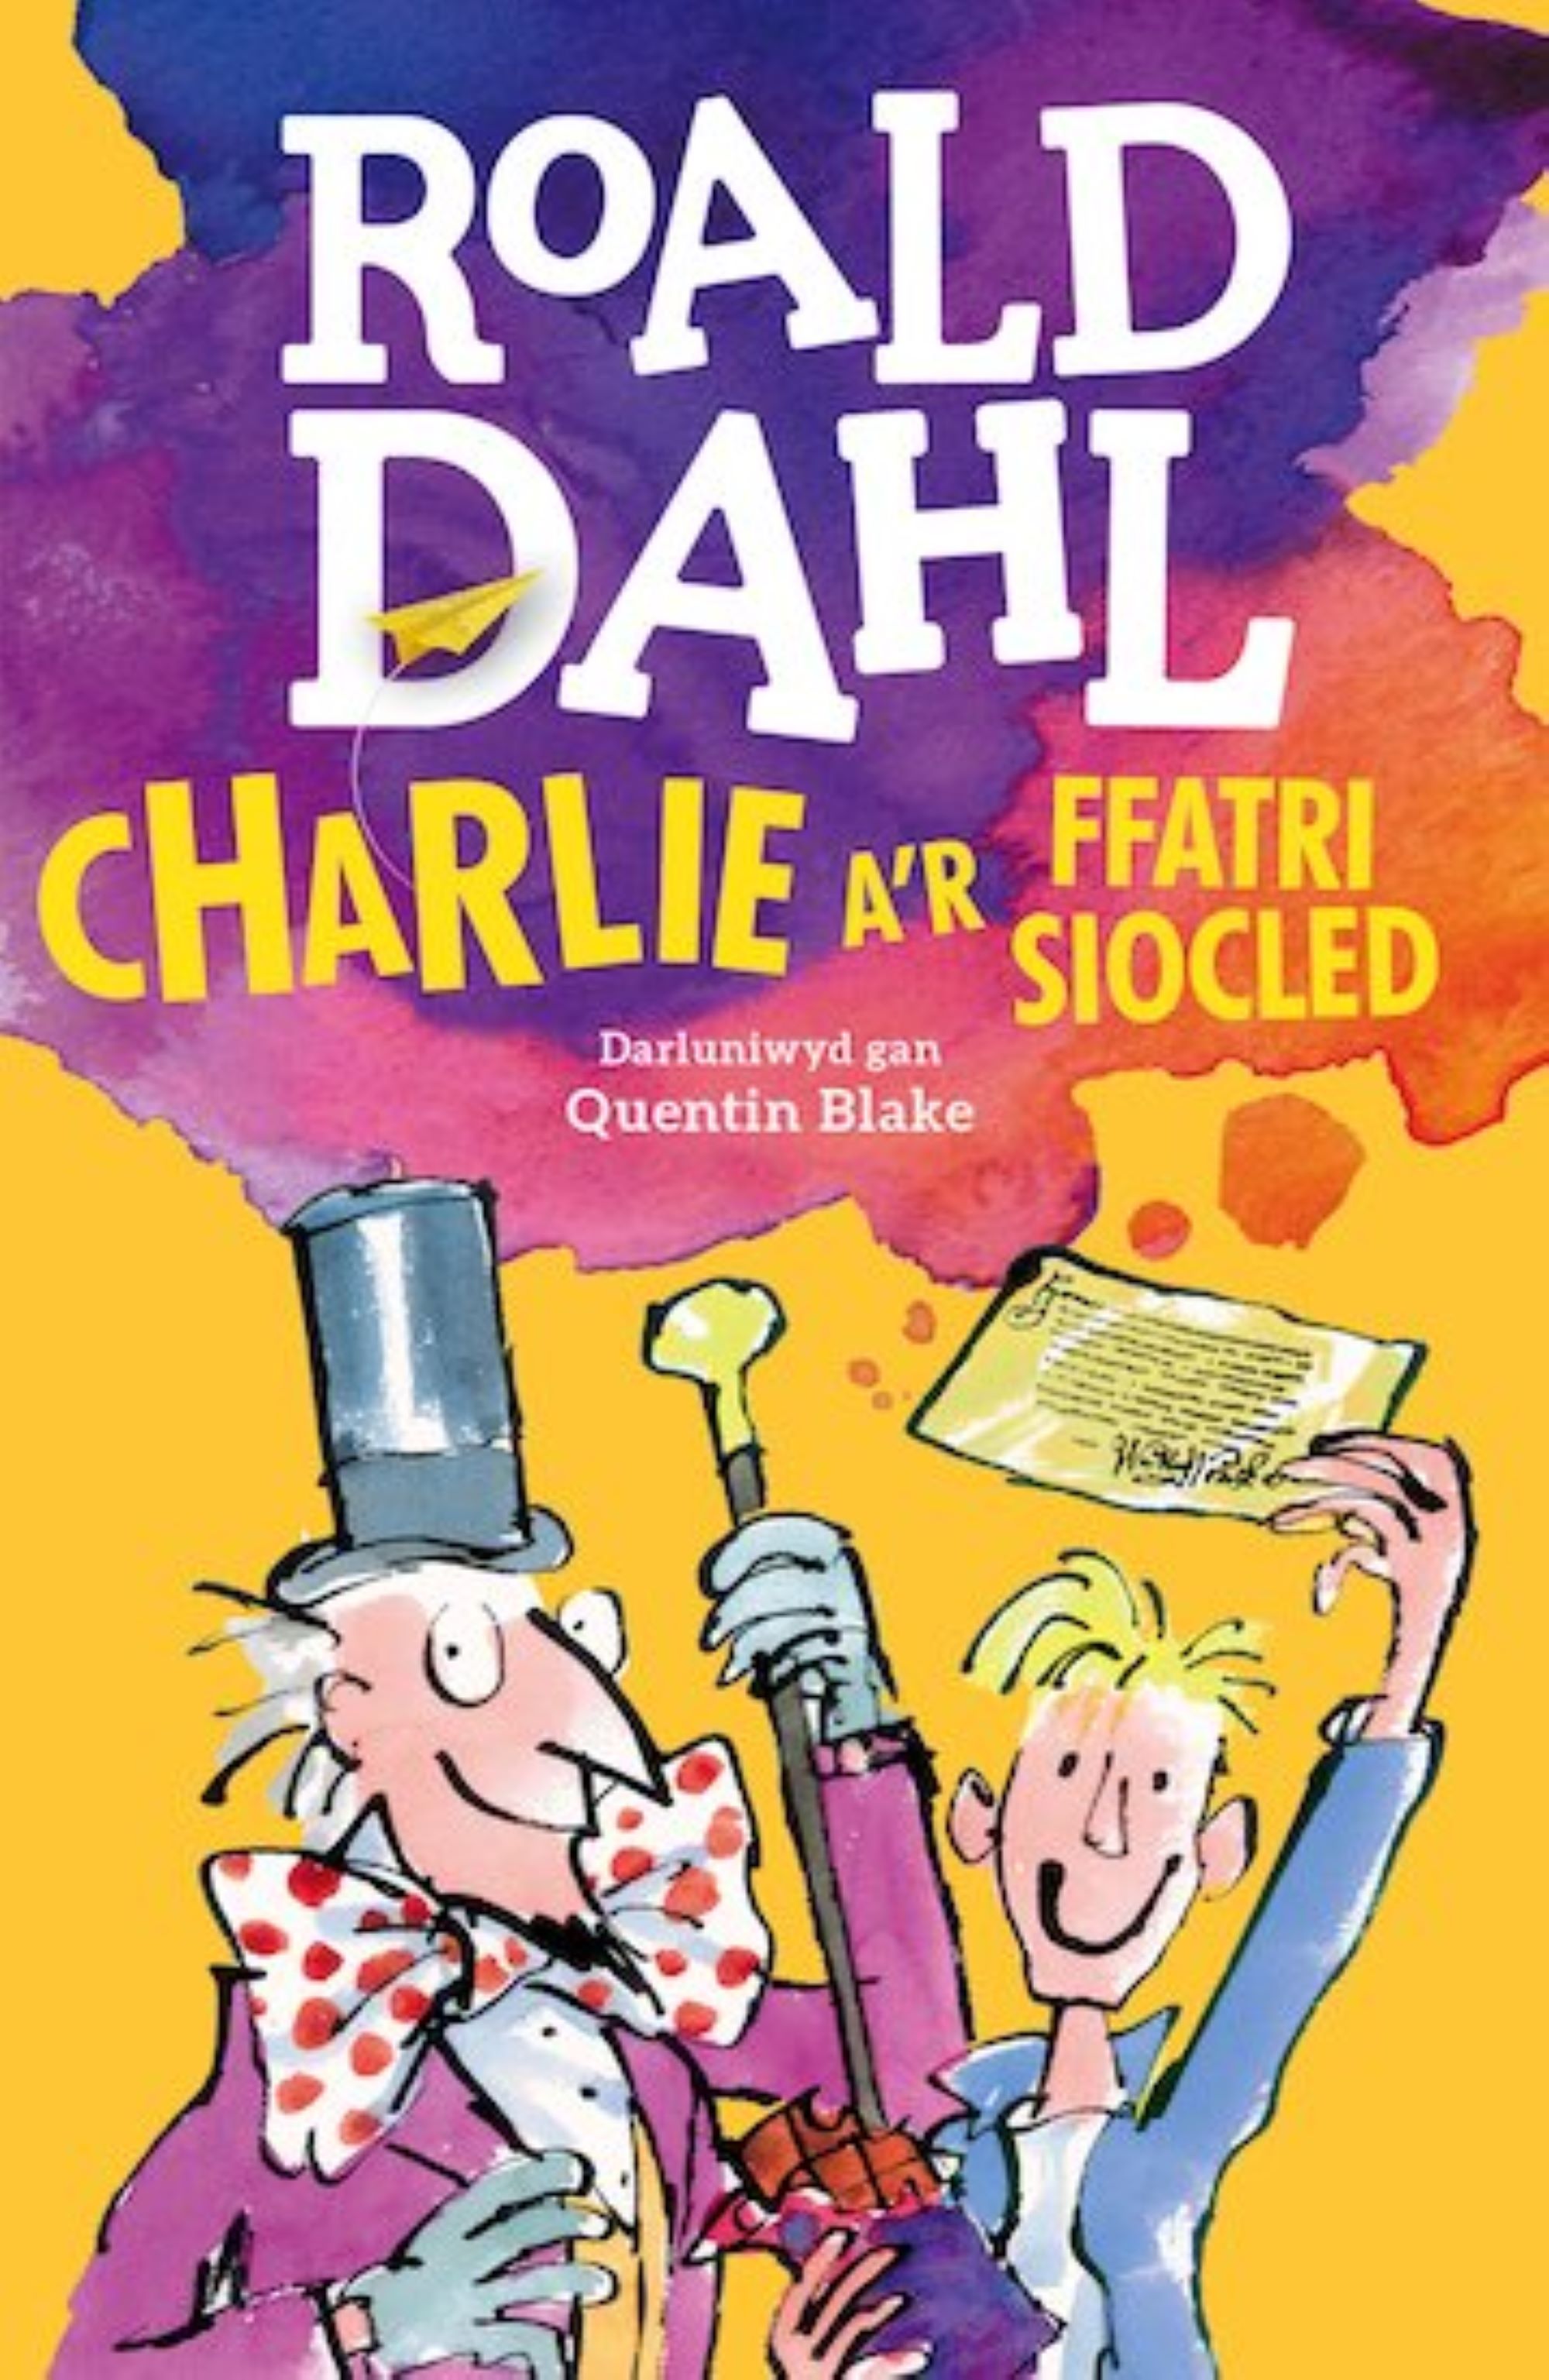 Charlie Ar Featri Siocled (Charlie and t